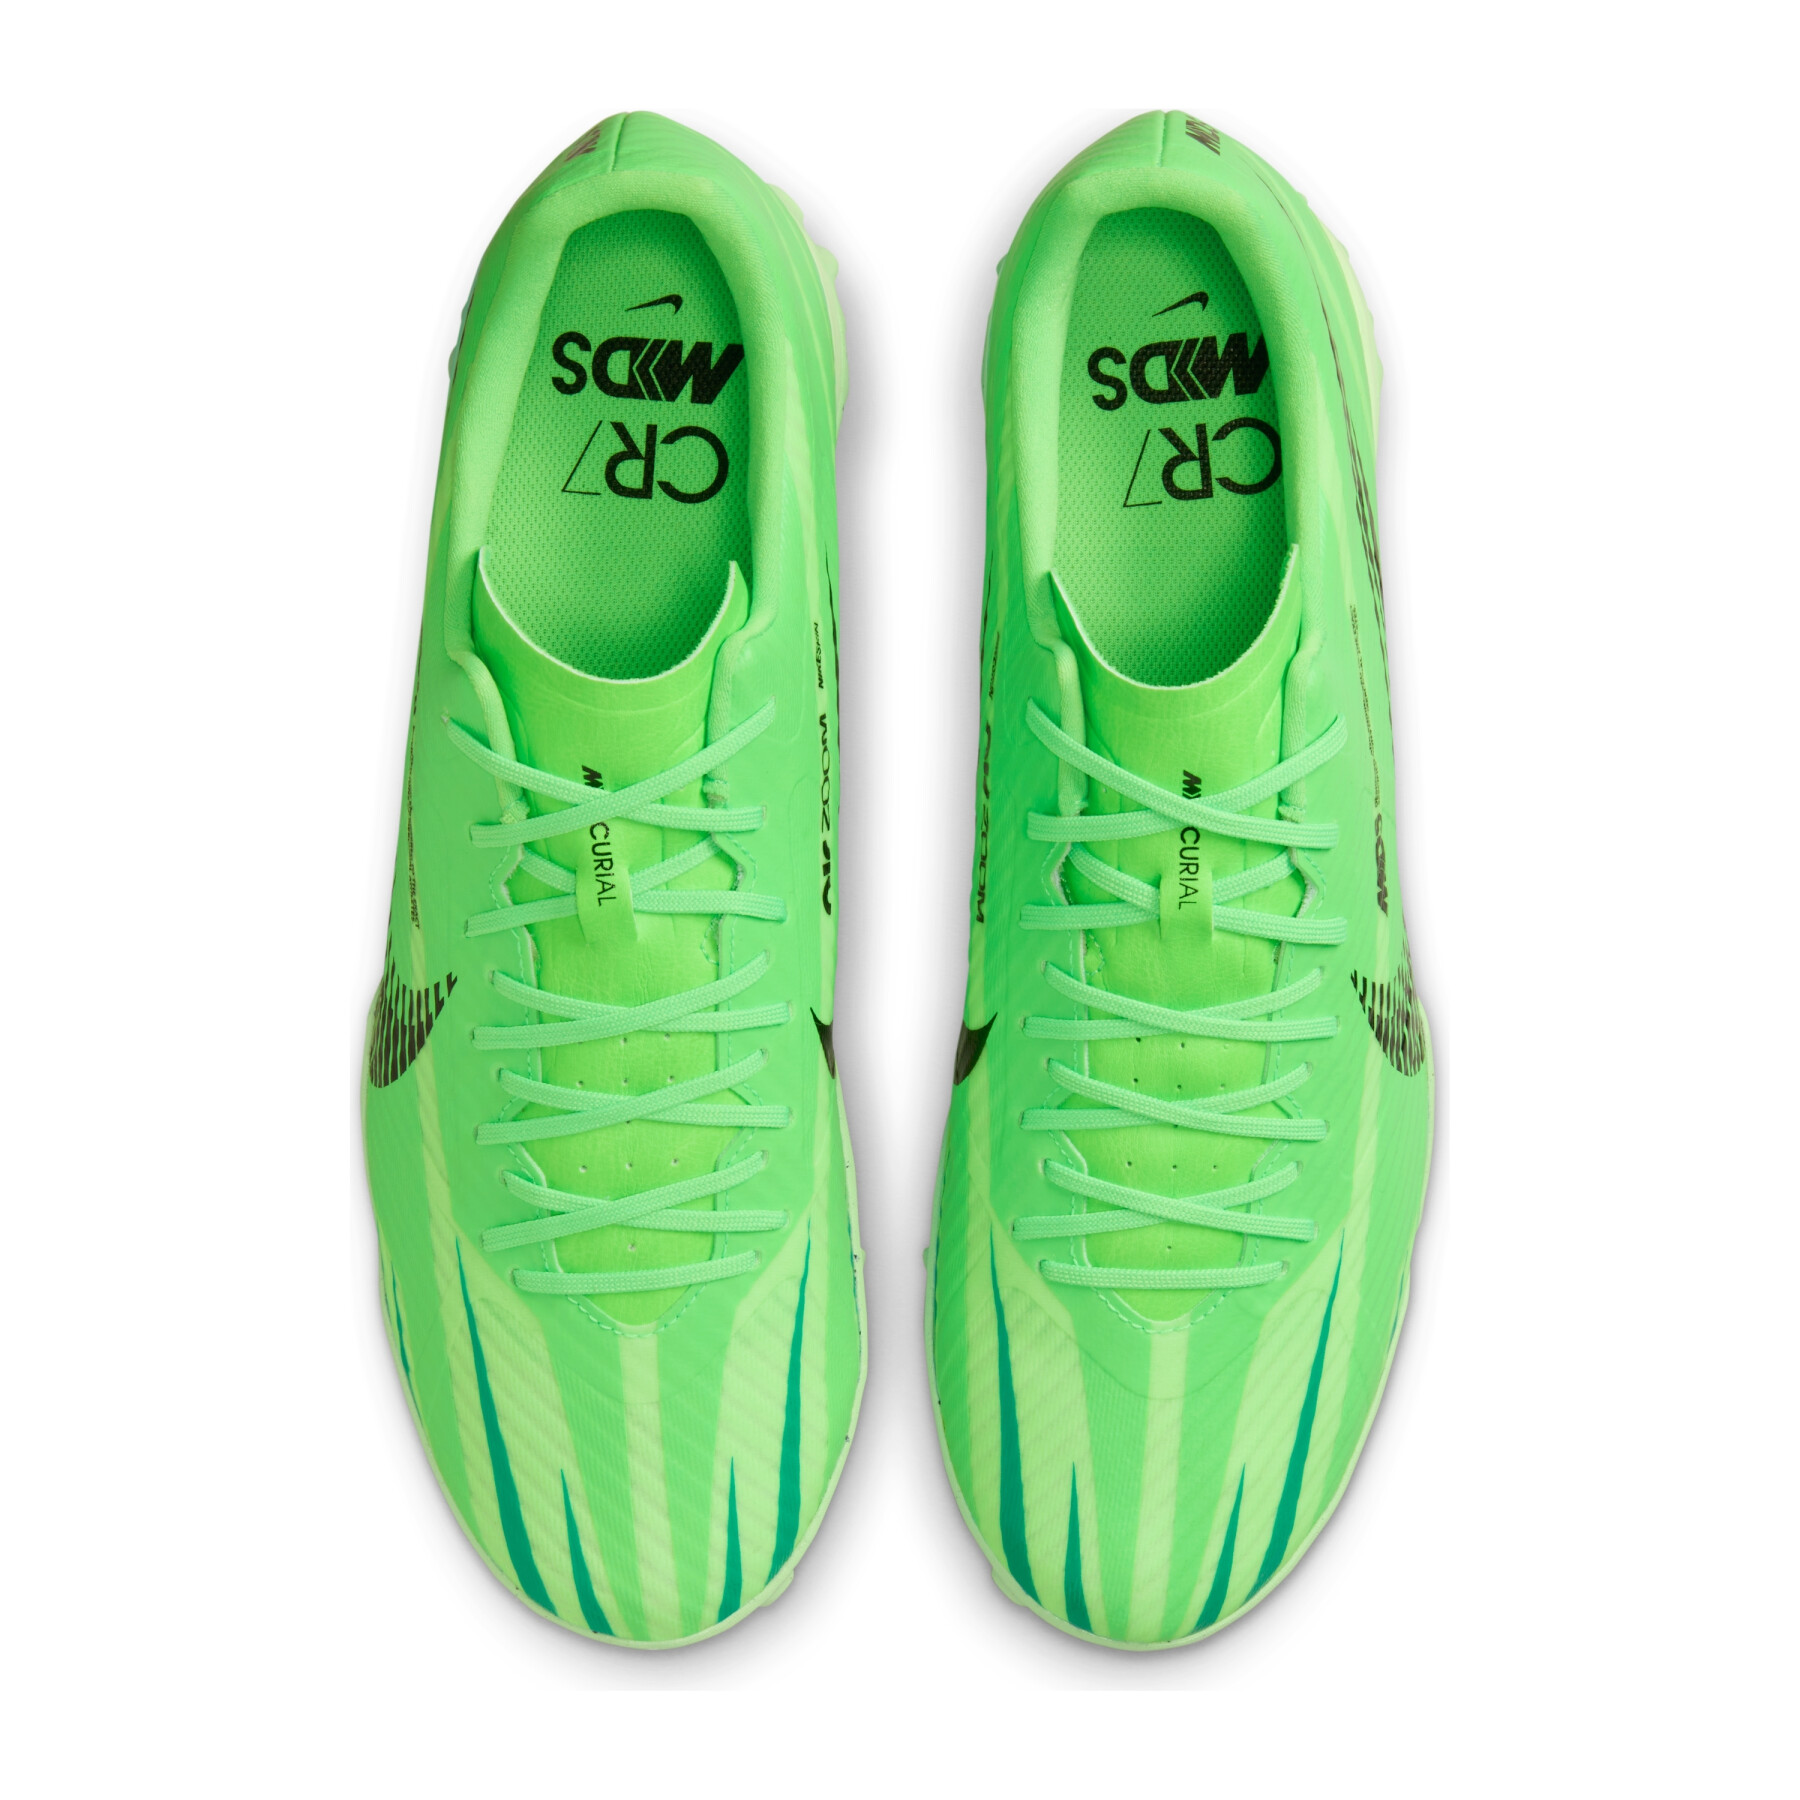 Soccer shoes Nike Zoom Vapor 15 Academy MDS TF